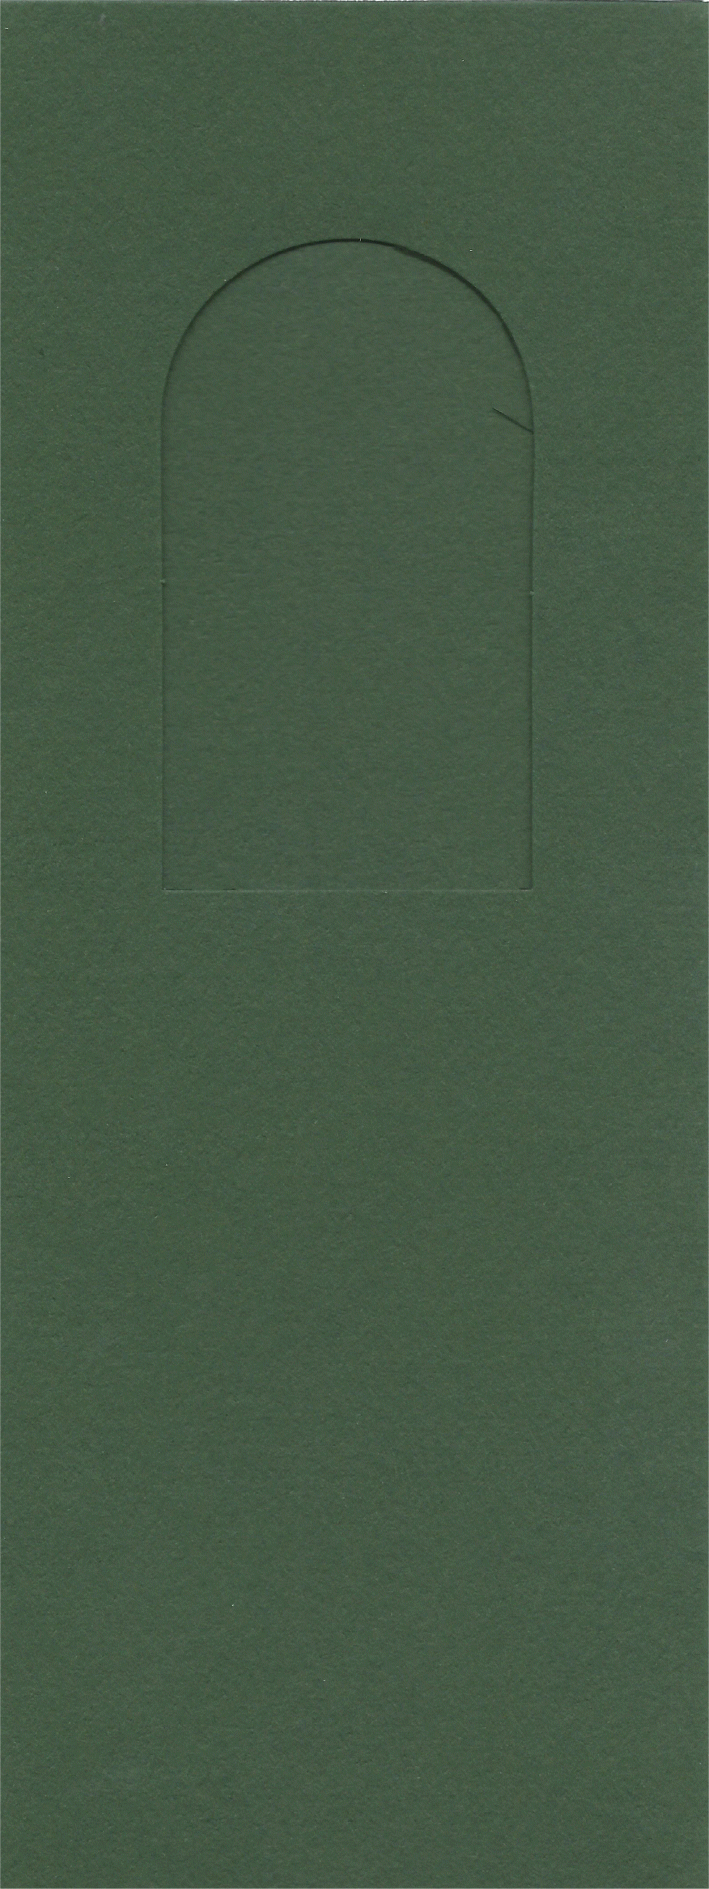 PK282-24 Dark Green Double Fold with Small Arched Aperture.  Pack of 5 Cards      